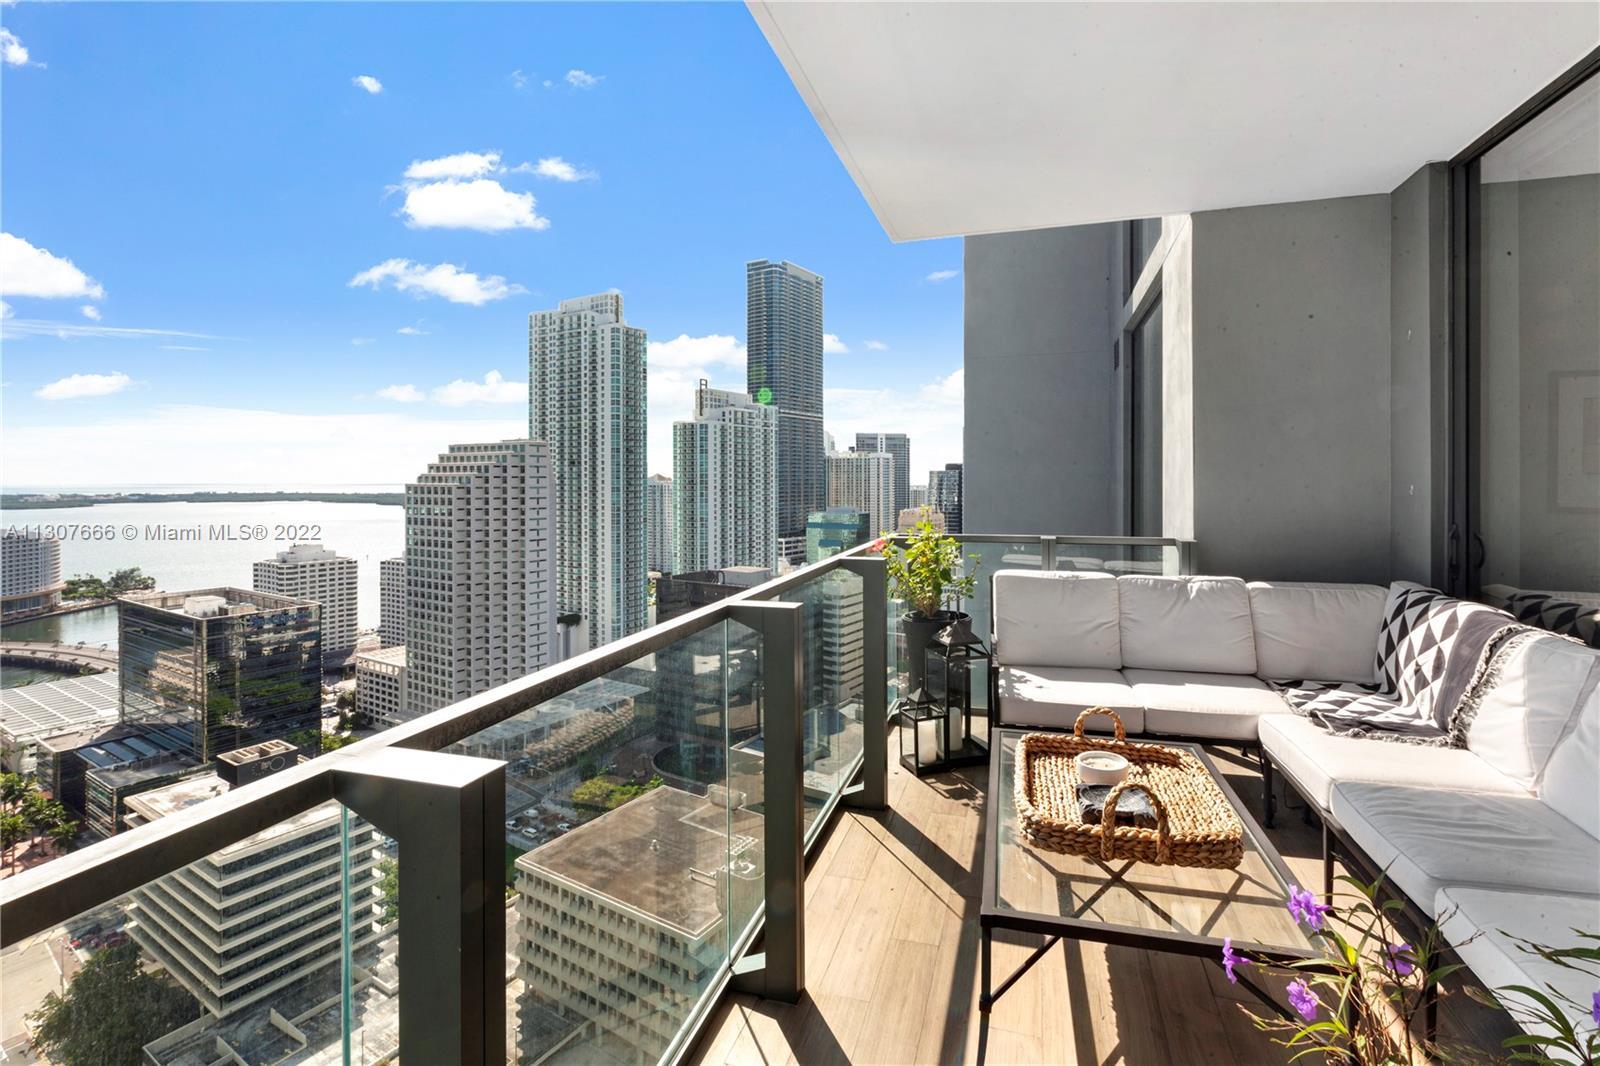 Best line at Reach at Brickell City Centre! Stunning panoramic water and city views from this spacio